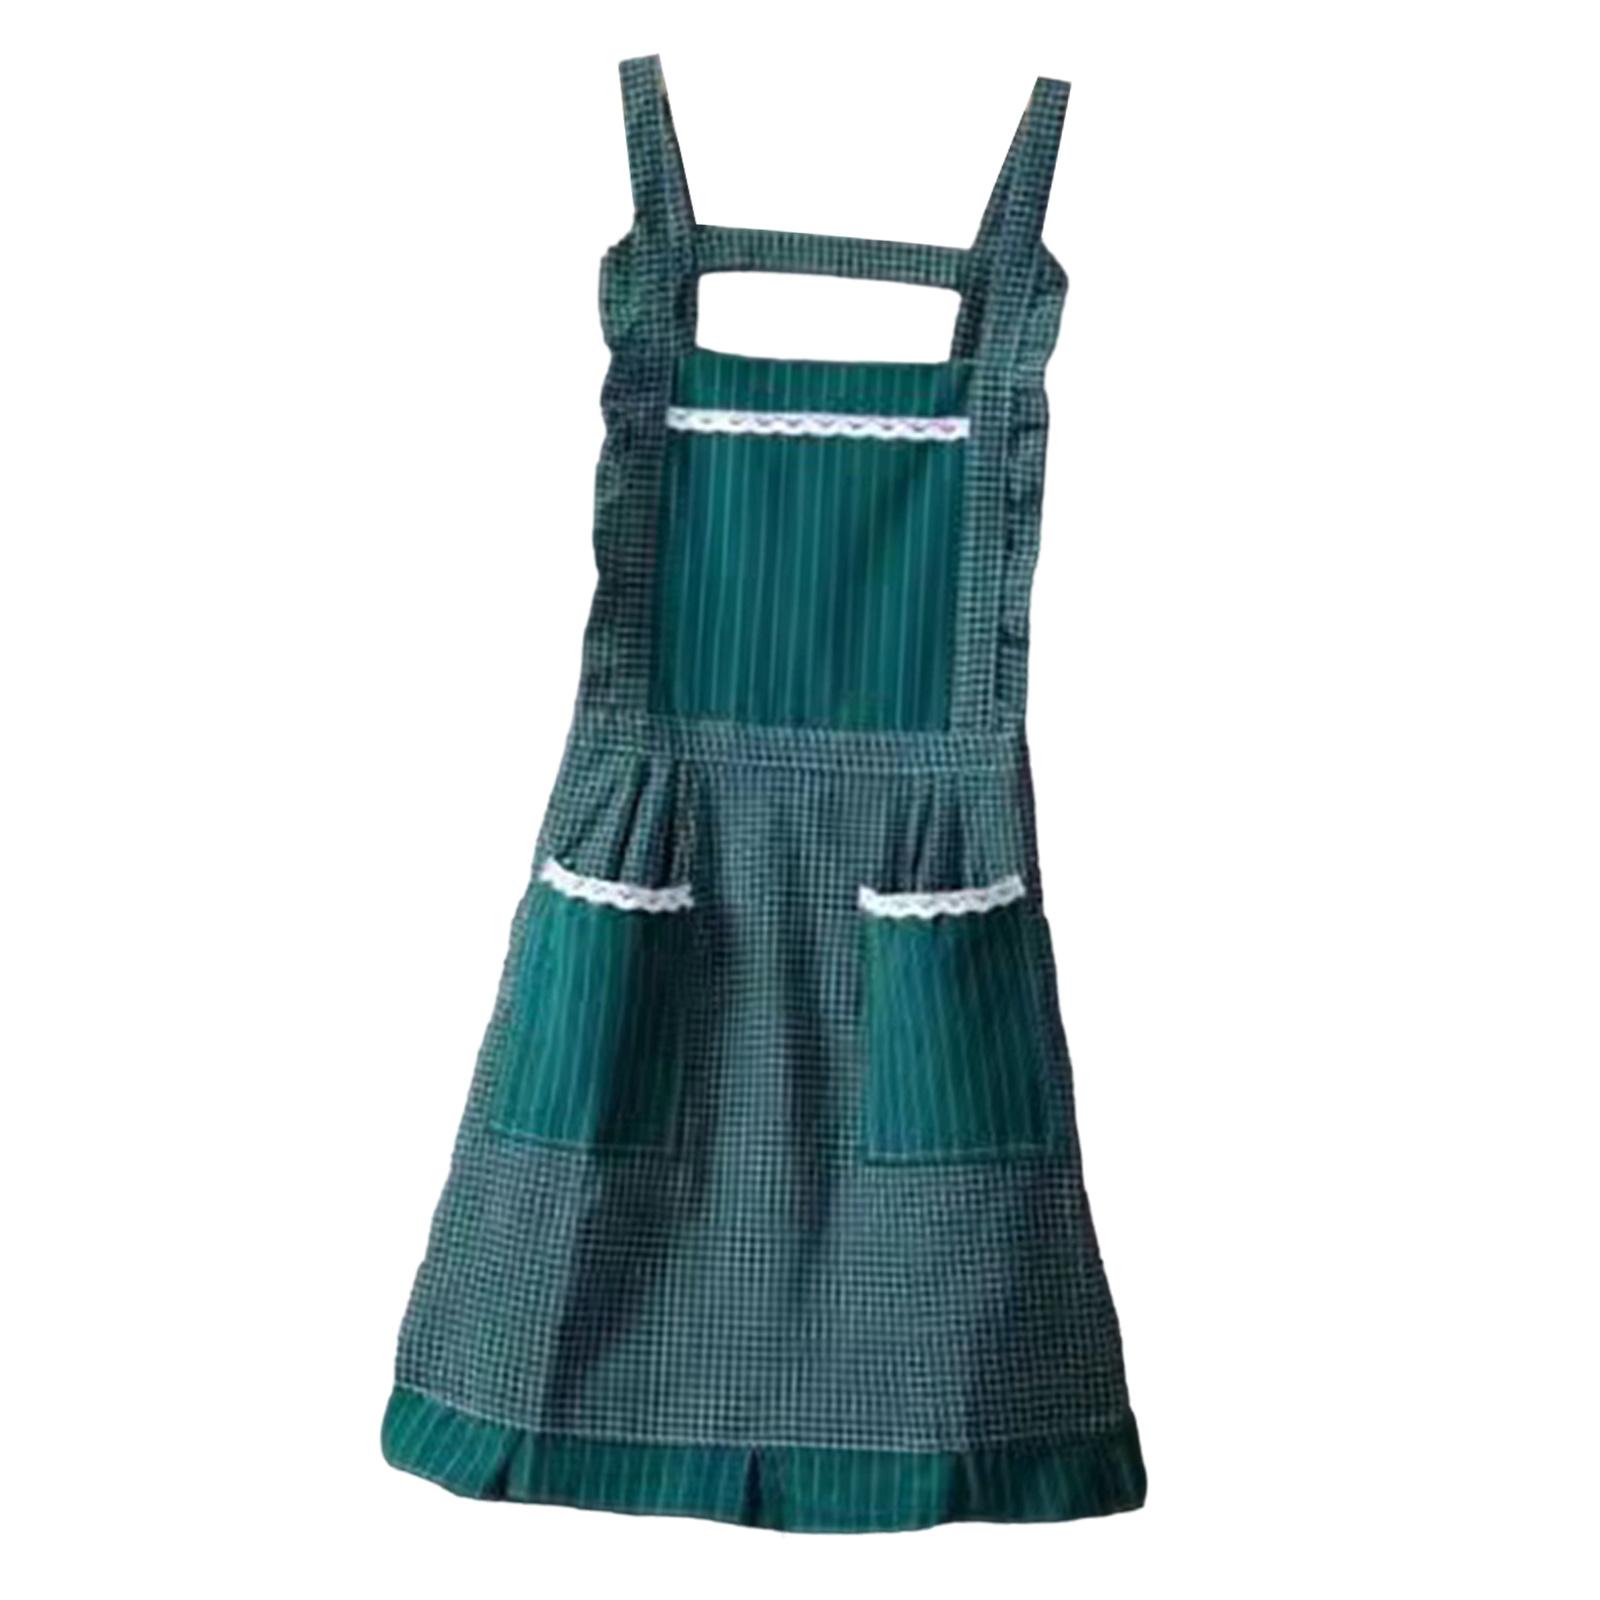 Serving Apron Cute 26.77x35.43inch Woman Chef Apron for Flower Shop Painting Dark Green